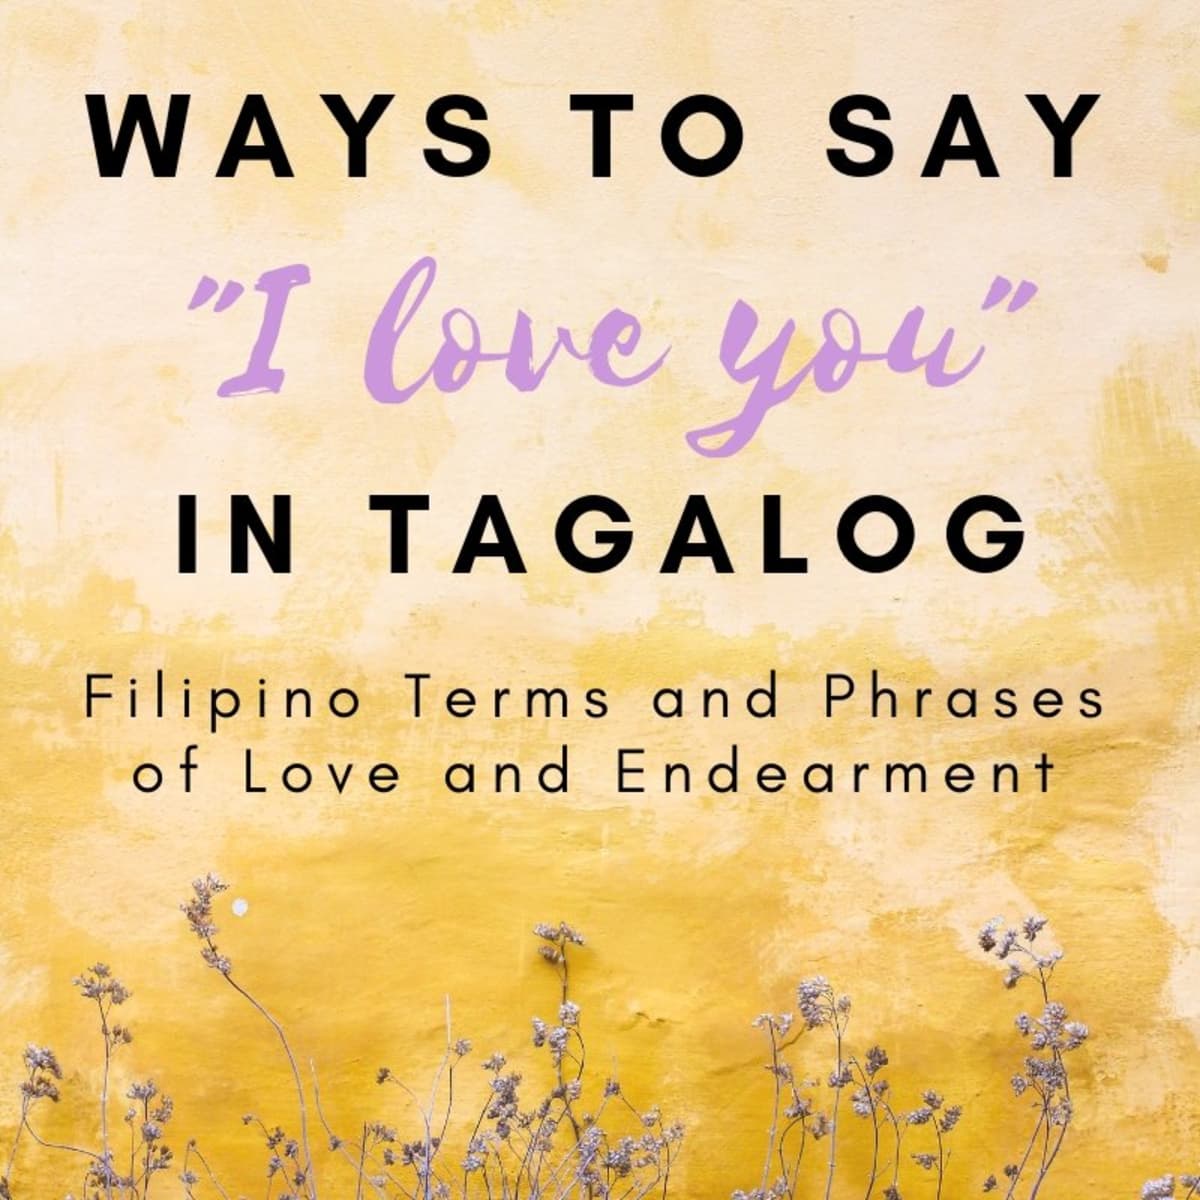 How To Say I Love You In alog Filipino Words And Terms Of Endearment Owlcation